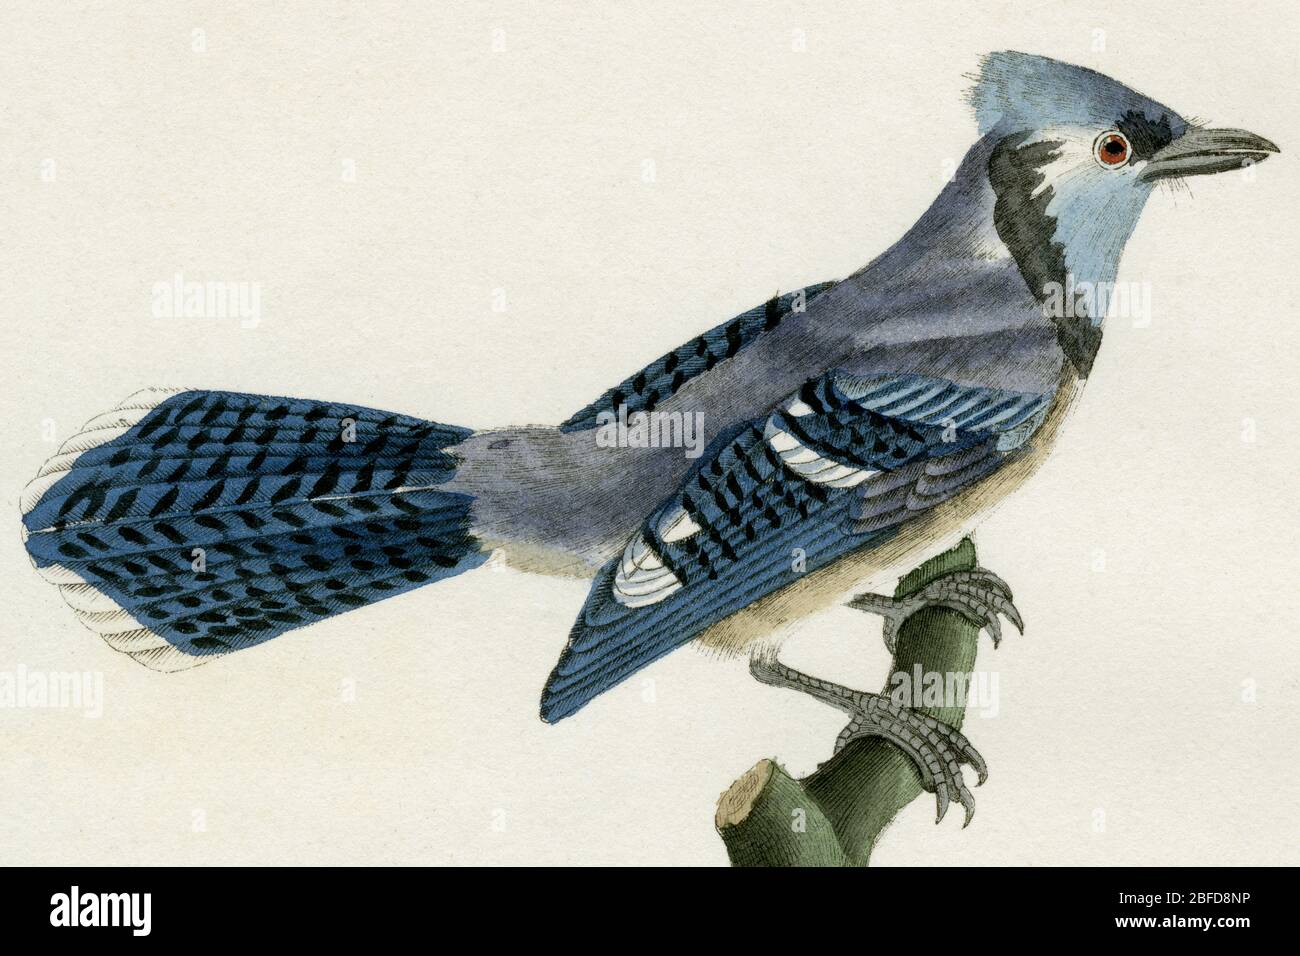 Crested blue jay (Cyanocitta cristata).  Detail of an engraving created in the 1800s for the “Oeuvres complètes de Buffon, augmentées par M.F. Cuvier”, published in 29 volumes from 1829 to 1832.  This “Complete works” brought the previous century's influential writings by Georges-Louis Leclerc, Comte de Buffon (1707-1788), on natural history to new generations.  The engraving in this image was created from a drawing by Madame C. Pillot, wife of Paris-based publisher of the “Complete Works”, F D Pillot. Stock Photo